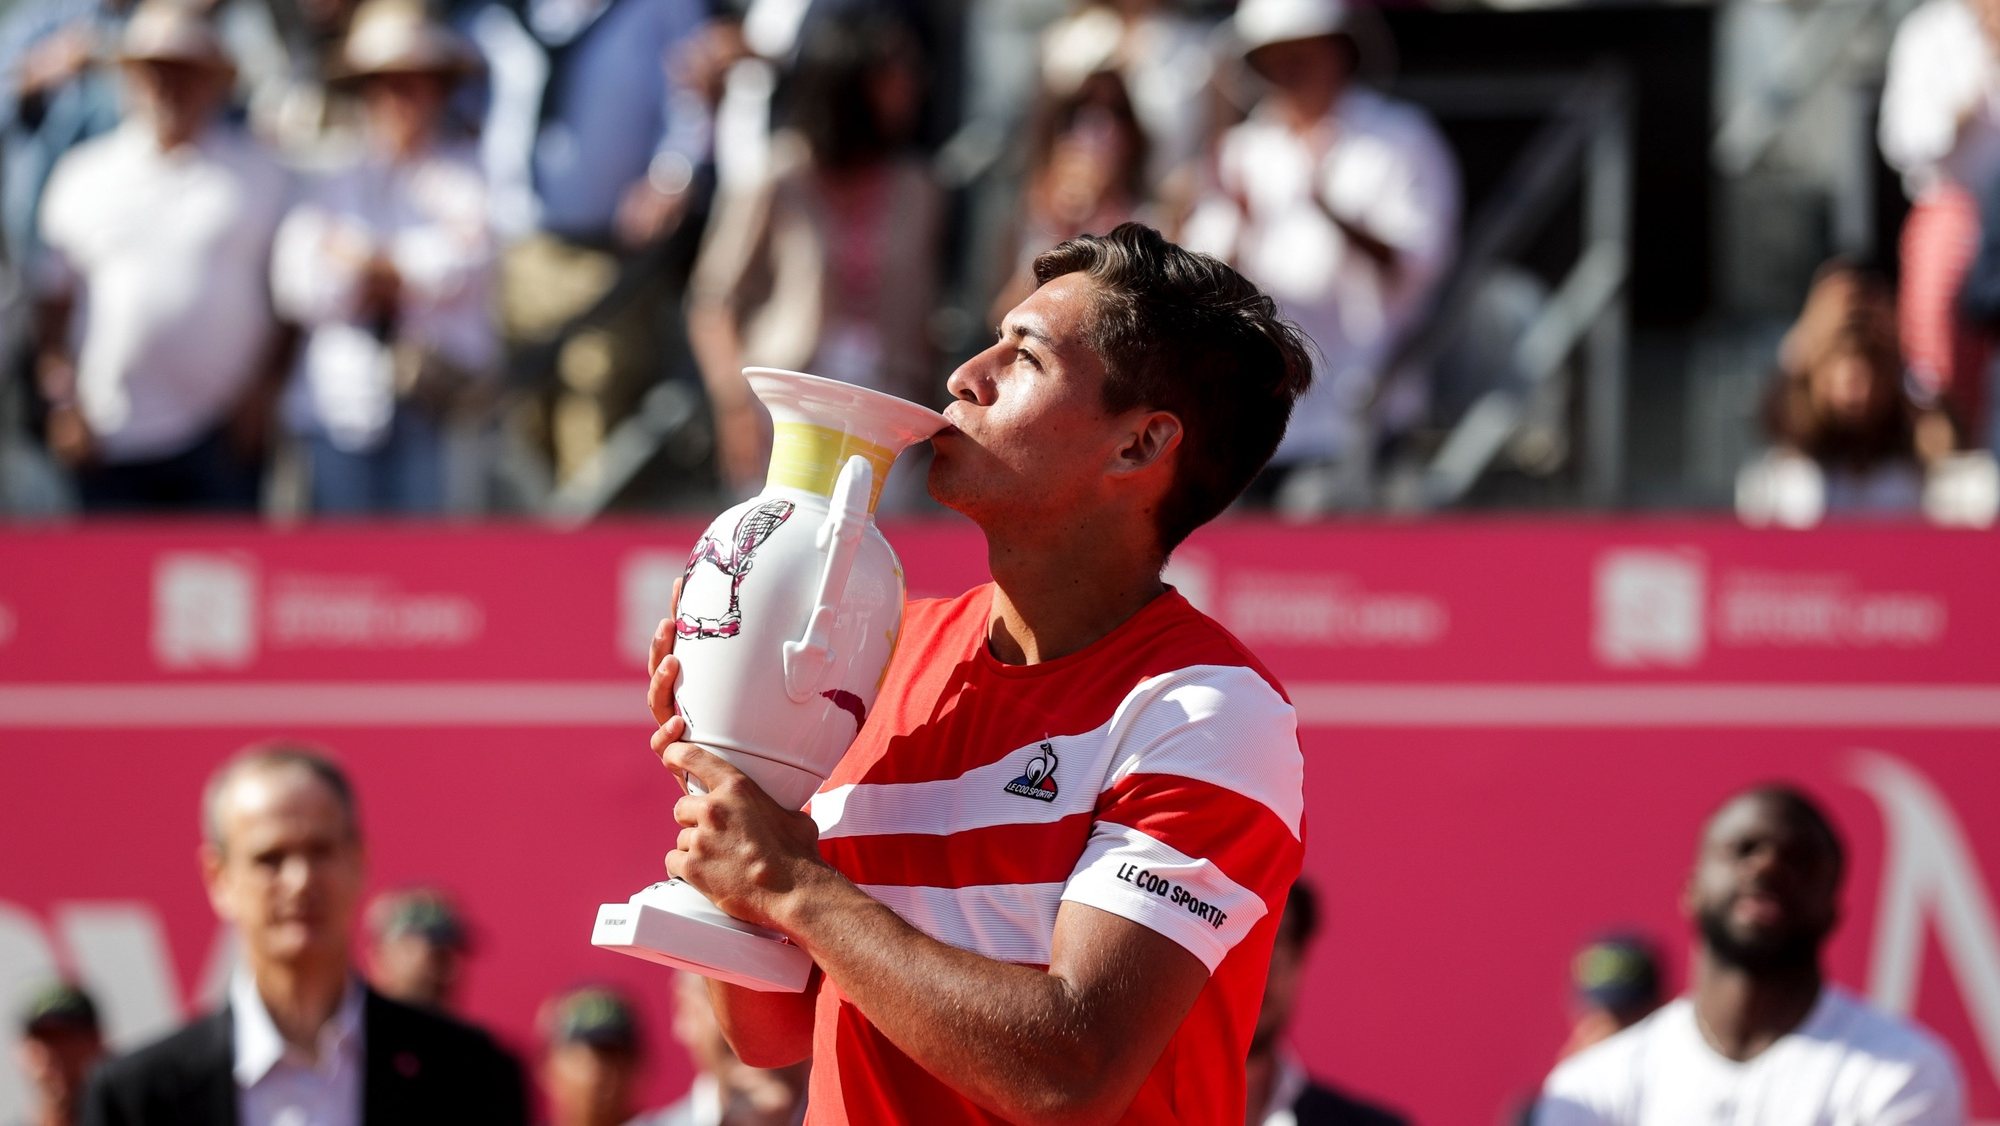 Argentina&#039;s tennis player Sebastian Baez with the trophy after winning the final match of the Estoril Open Tennis tournament against USA oponent Frances Tiafoe in Estoril, on the outskirts of Lisbon, Portugal, 01st may 2022. TIAGO PETINGA/LUSA